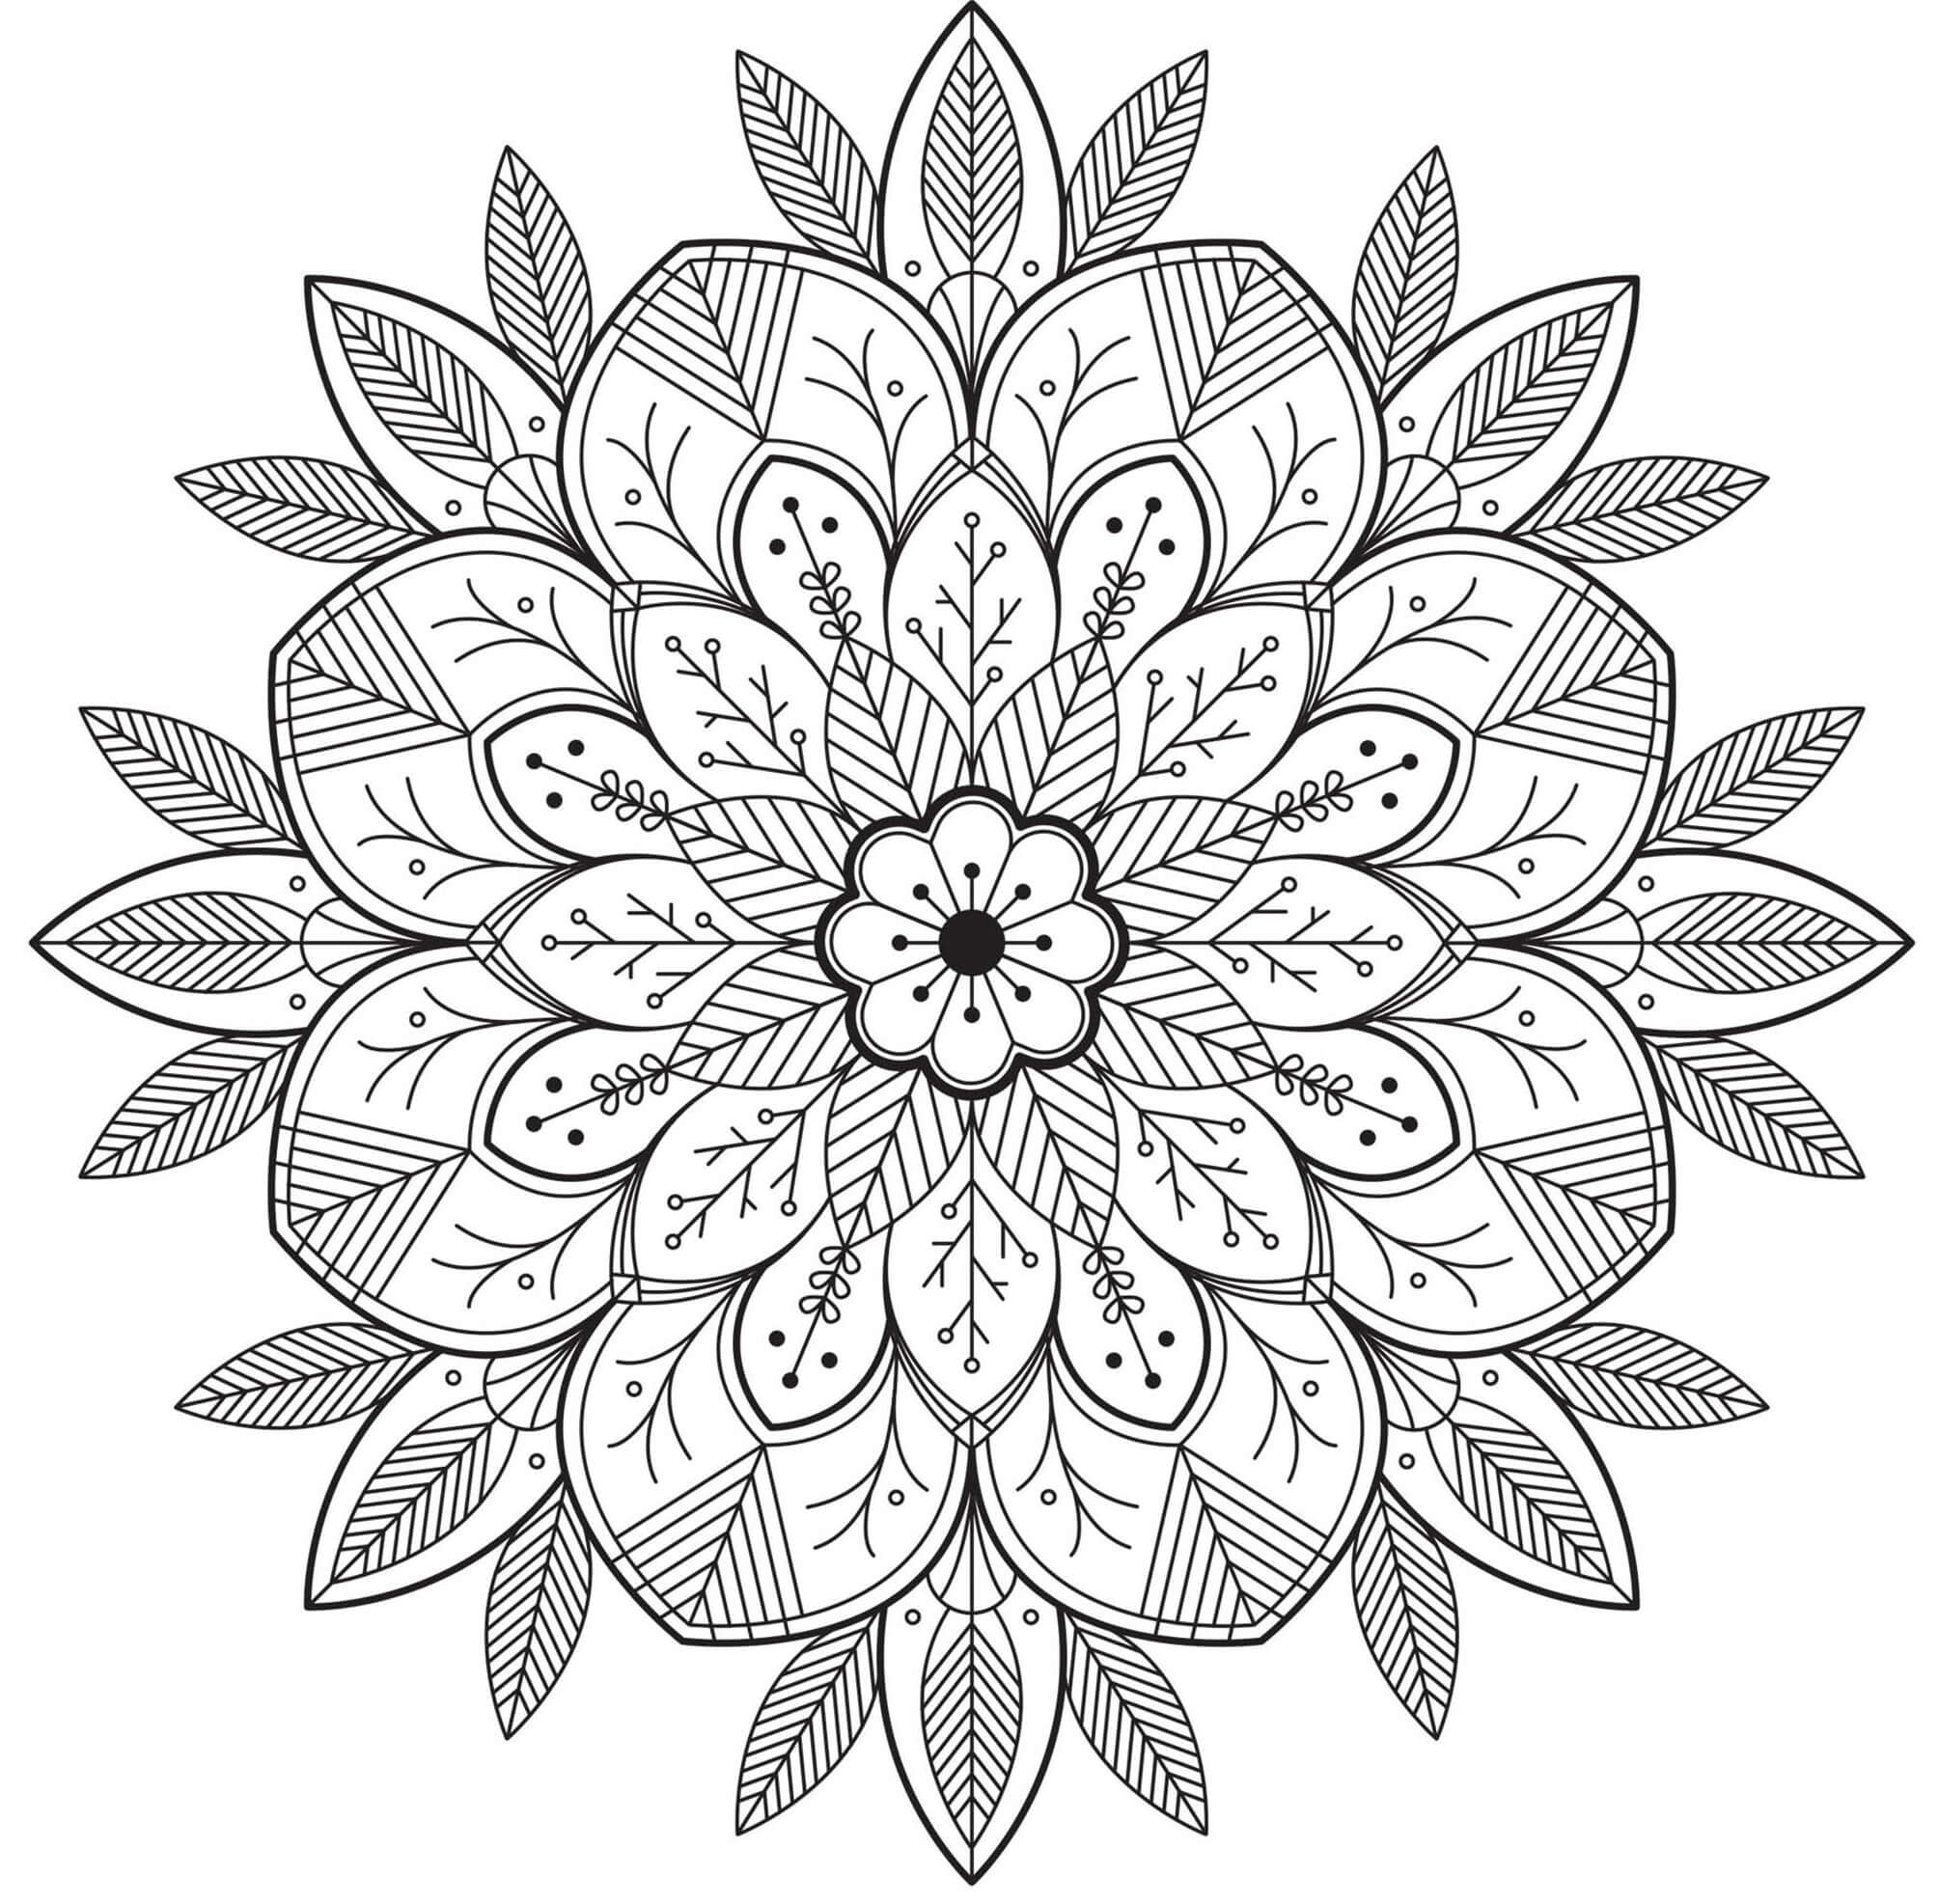 Mandala Flowers For Adult Coloring Page